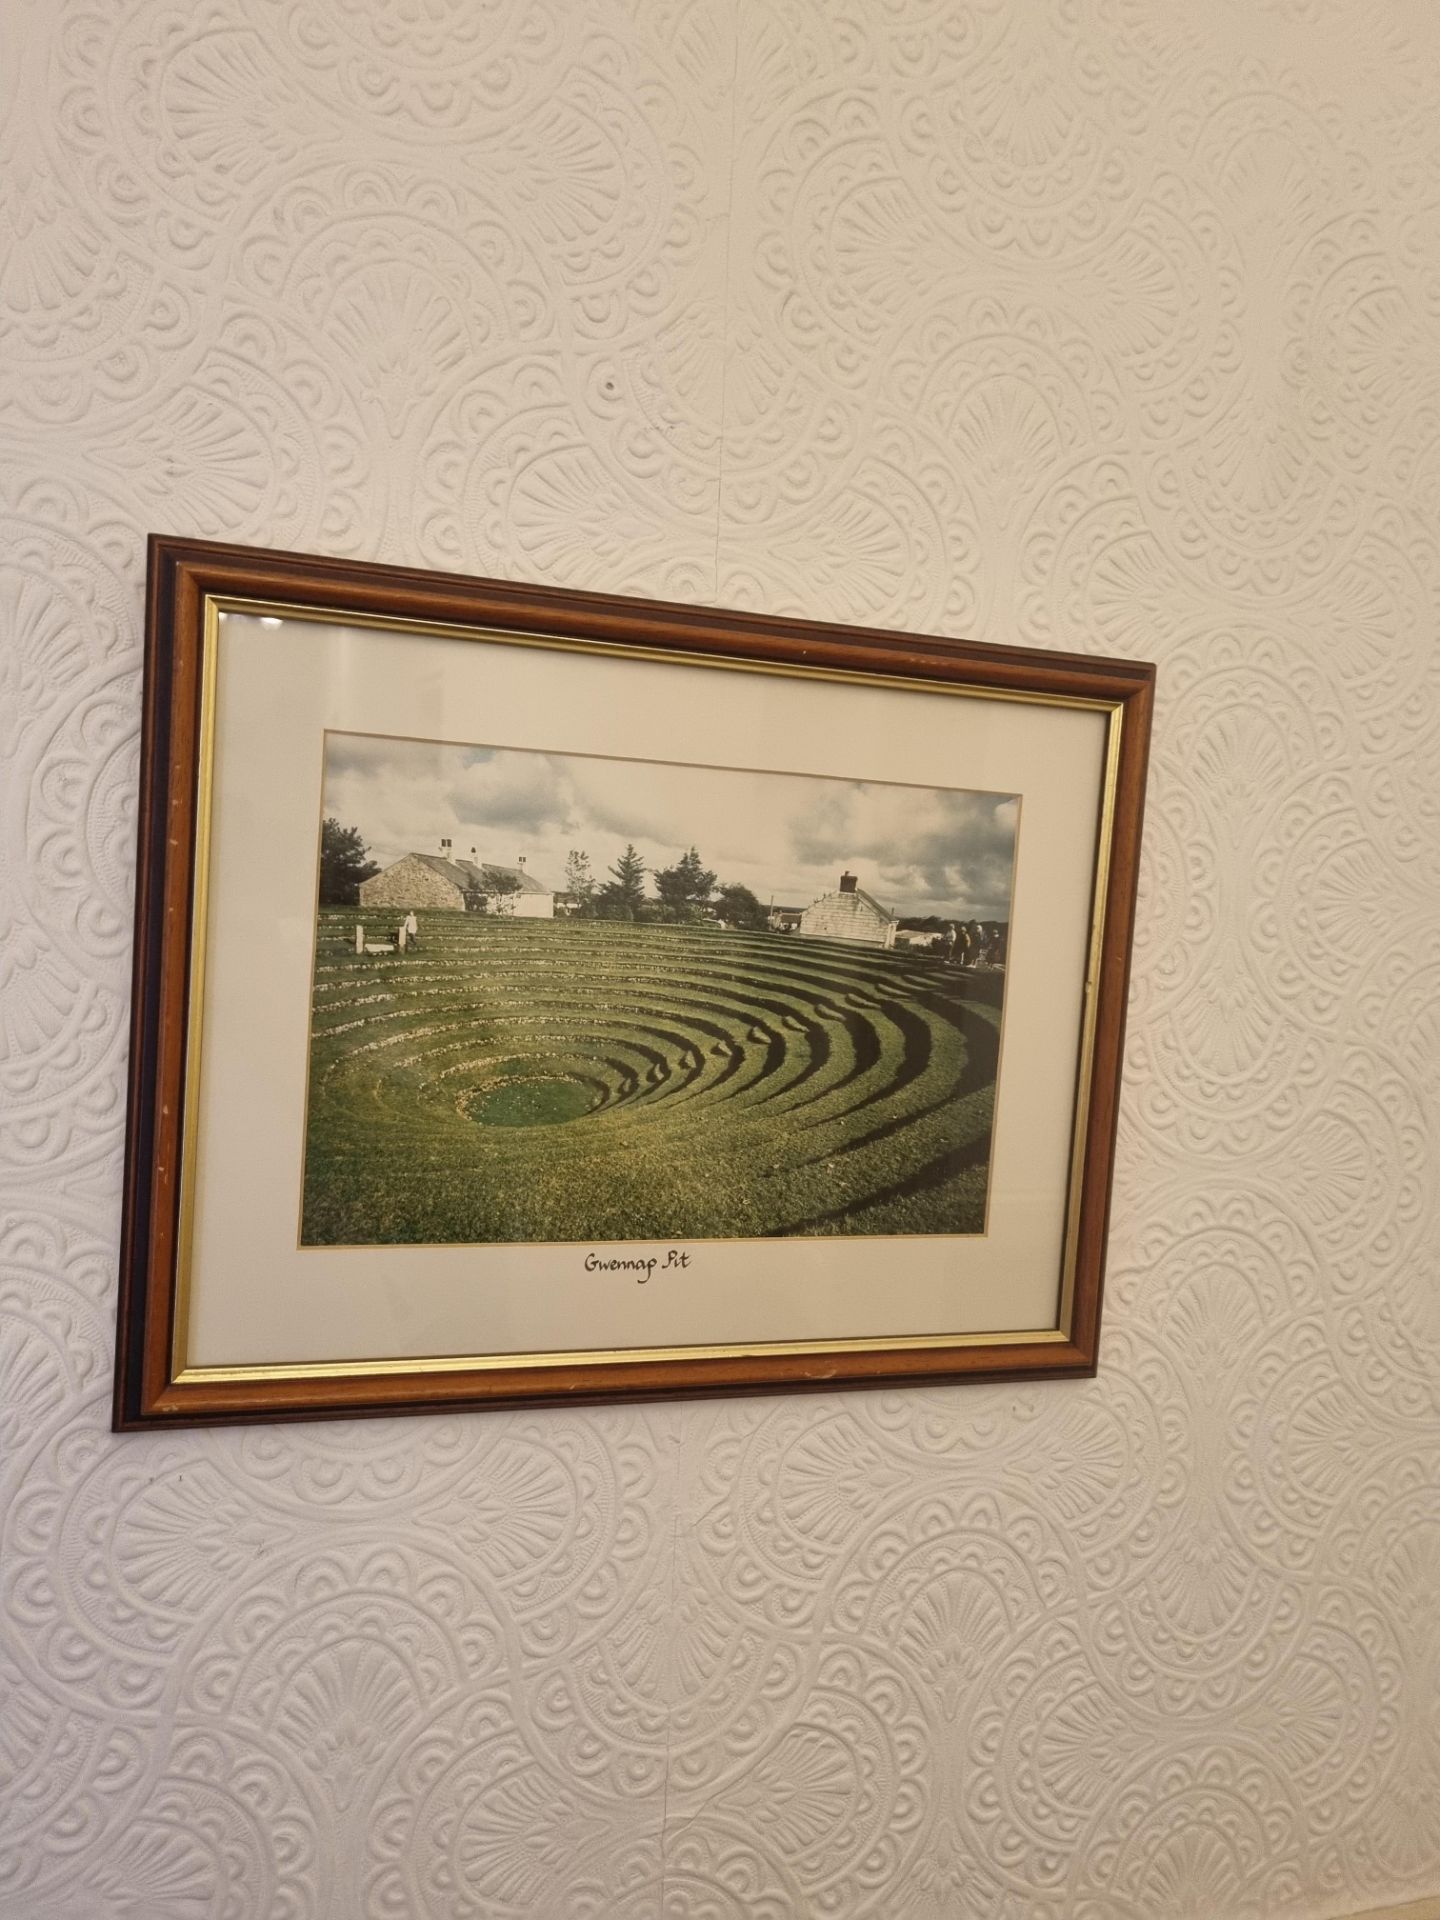 2x Prints In Wooden Frames With Gold Trim 430mm 330mm Comprising Of; Cape, Cornwall and Gwennap Pit - Image 3 of 4